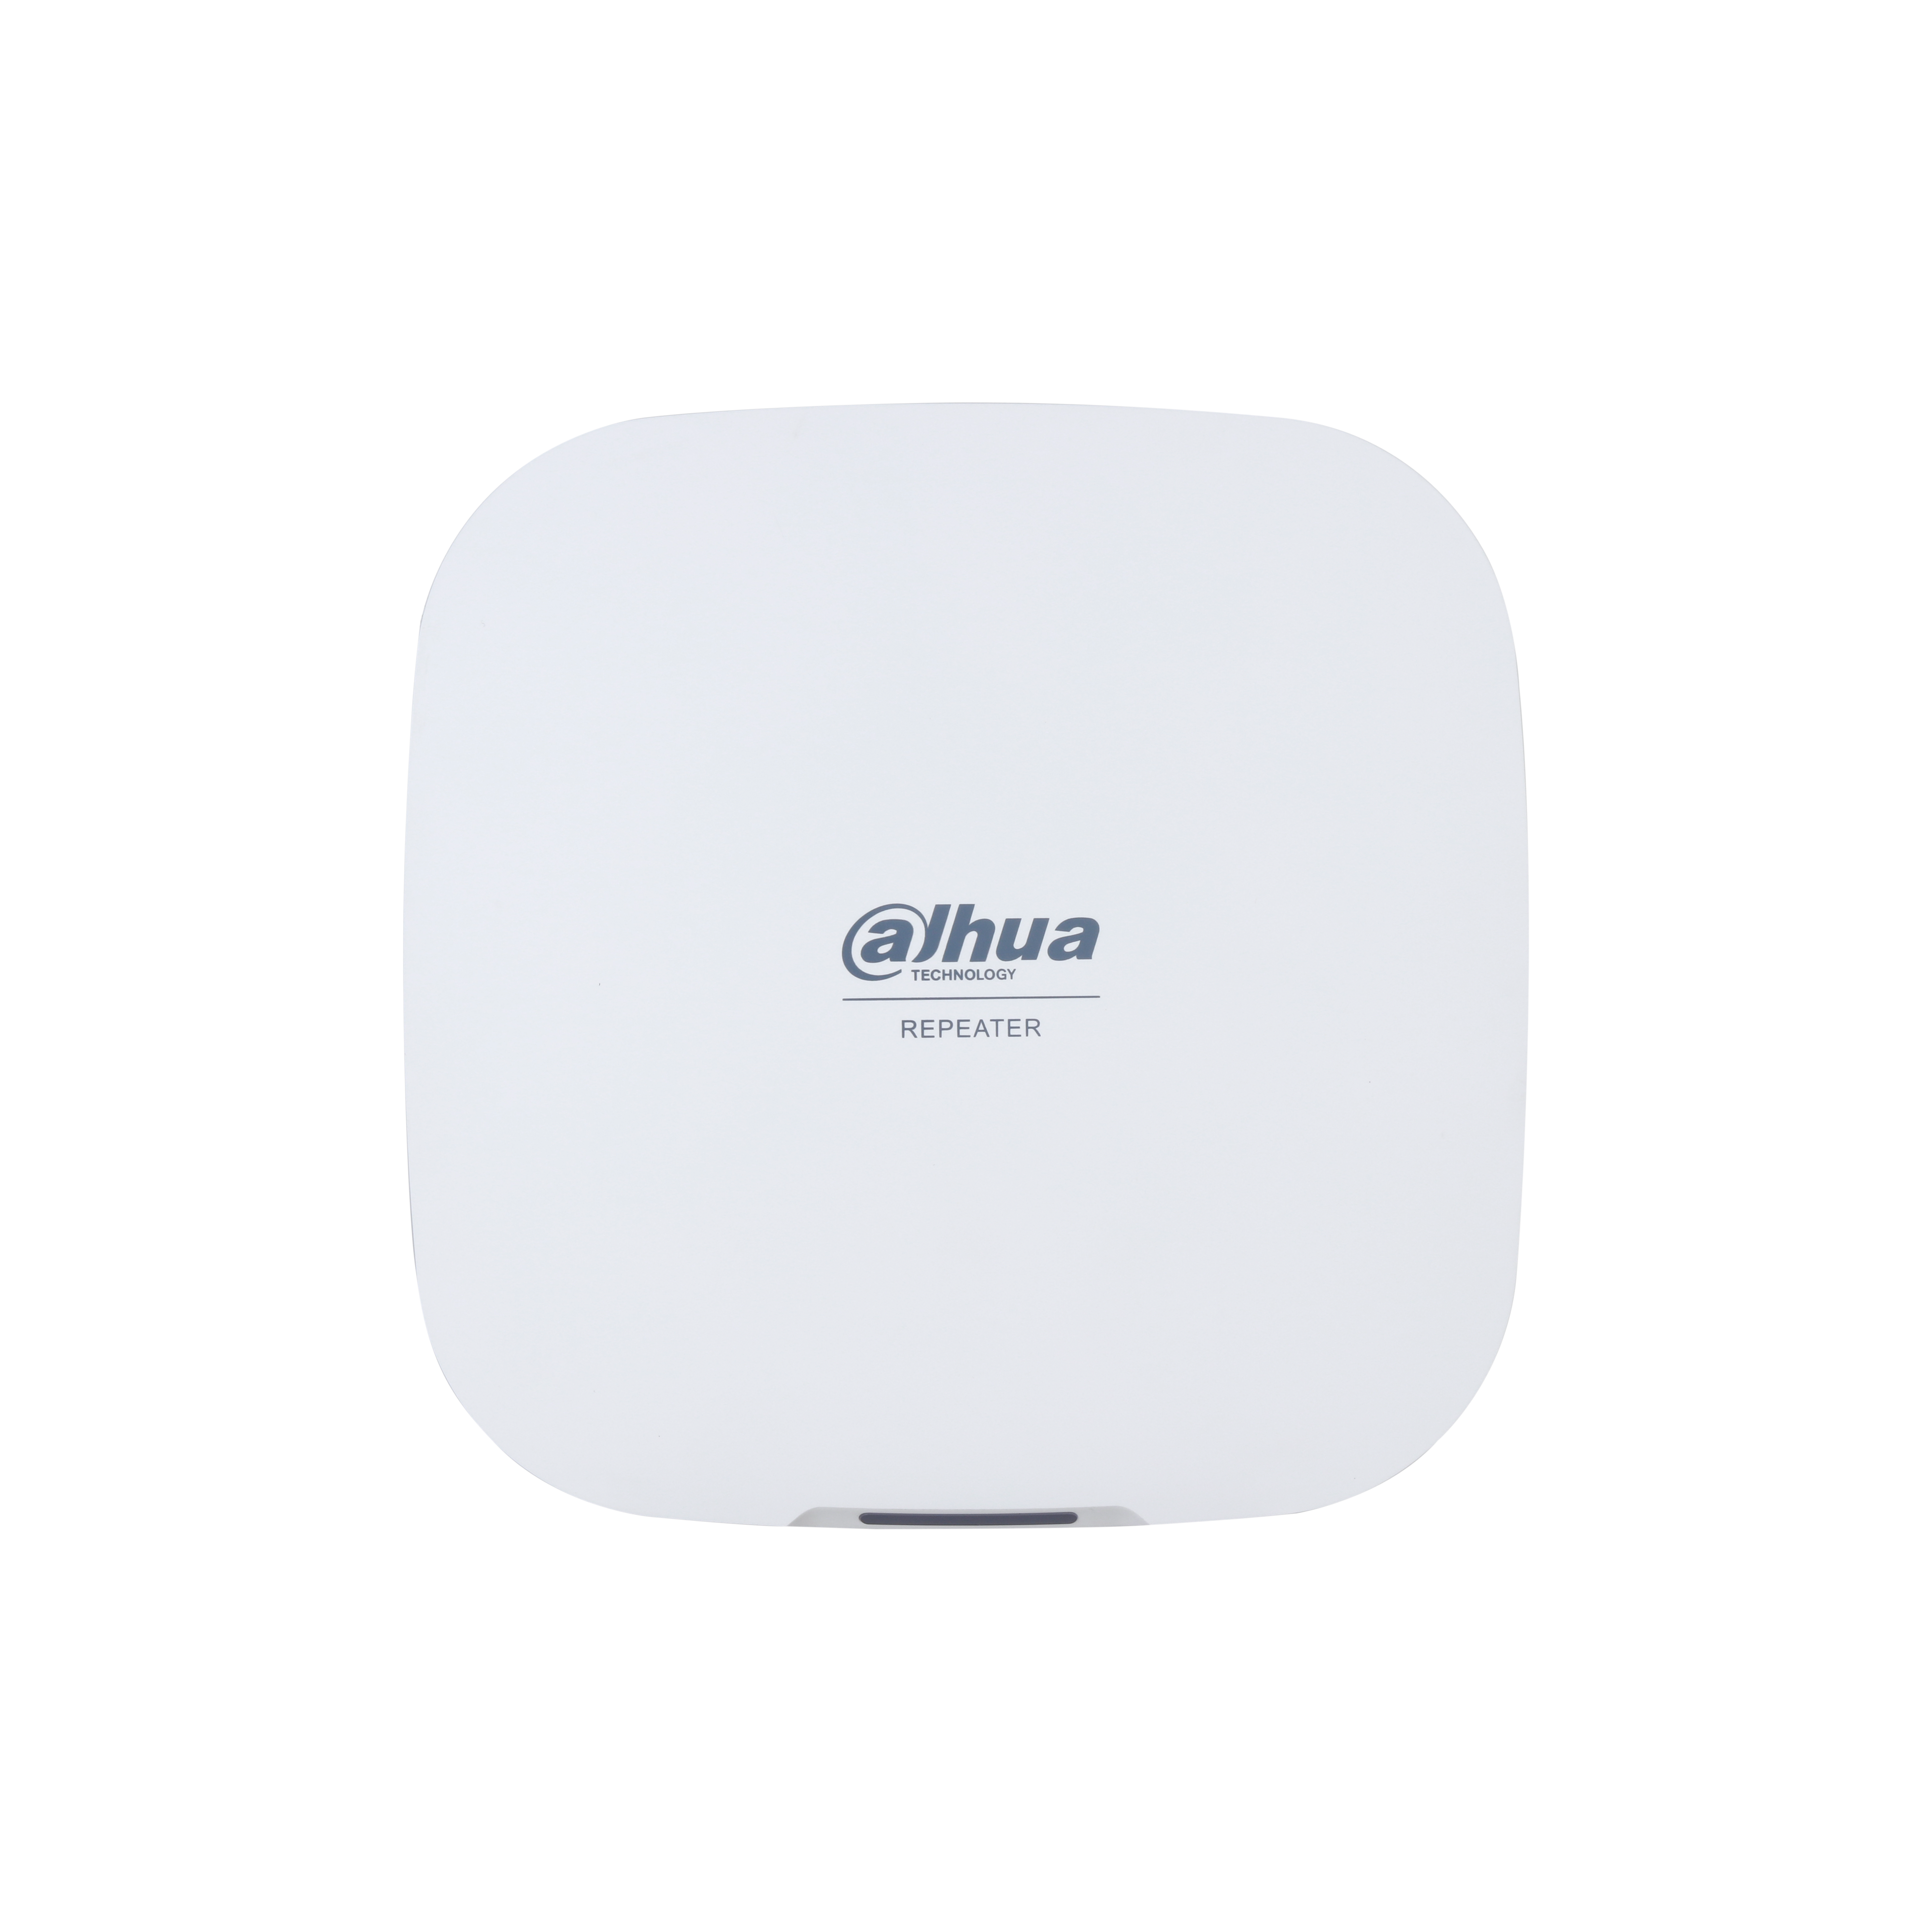 DAHUA WIRELESS WIRELESS EXPANDER MODULE WHITE 32 x WIRELESS DEVICES PLASTIC WALL MOUNT 320G 12VDC SUITS DHI-ART-ARC3000H-03-FW2